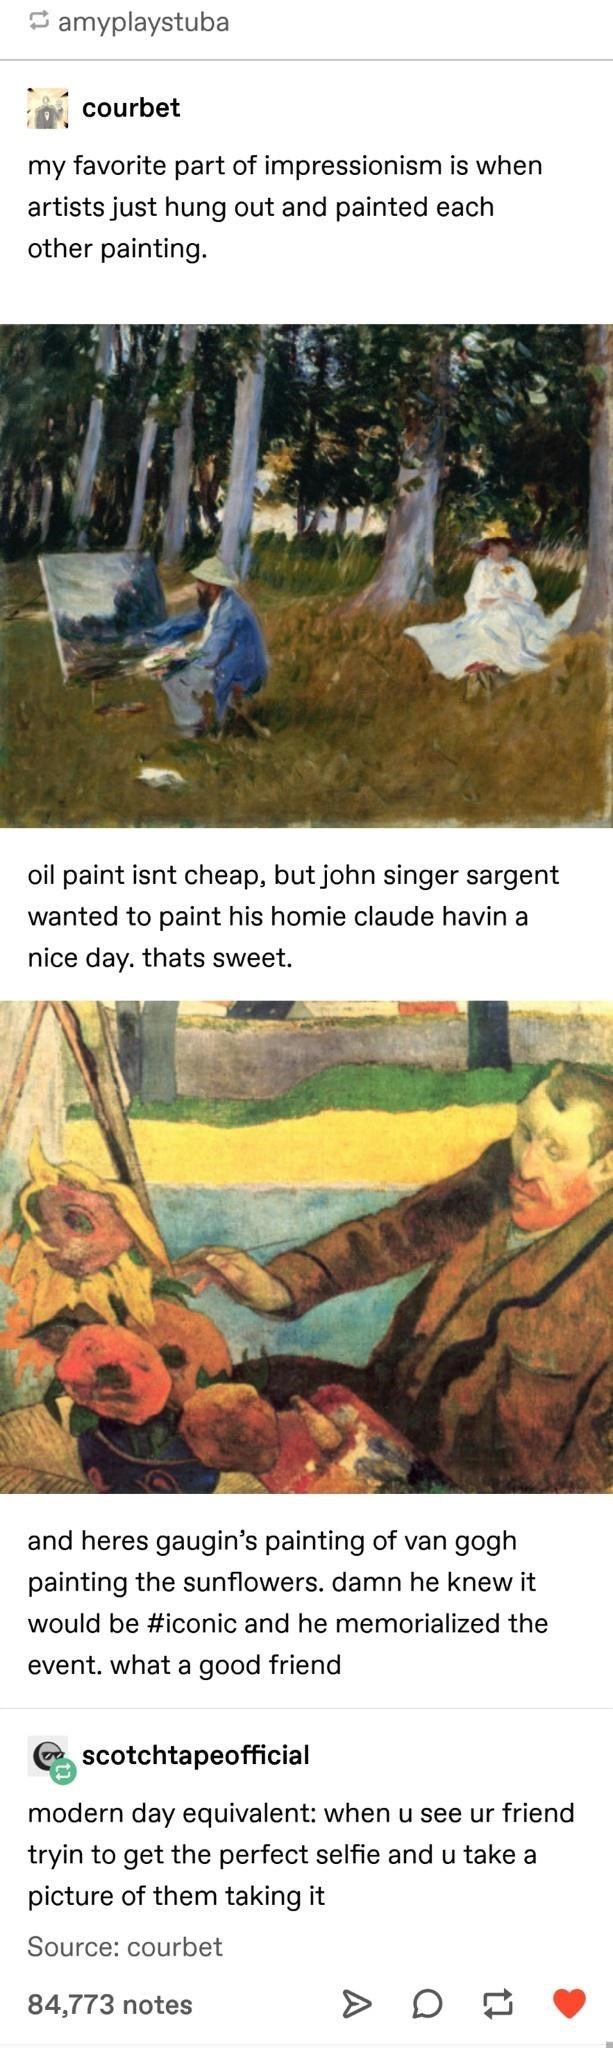 Impressionism - Pamyplaystuba courbet my favorite part of impressionism is when artists just hung out and painted each other painting. oil paint isnt cheap, but john singer sargent wanted to paint his homie claude havin a nice day. thats sweet. and heres 